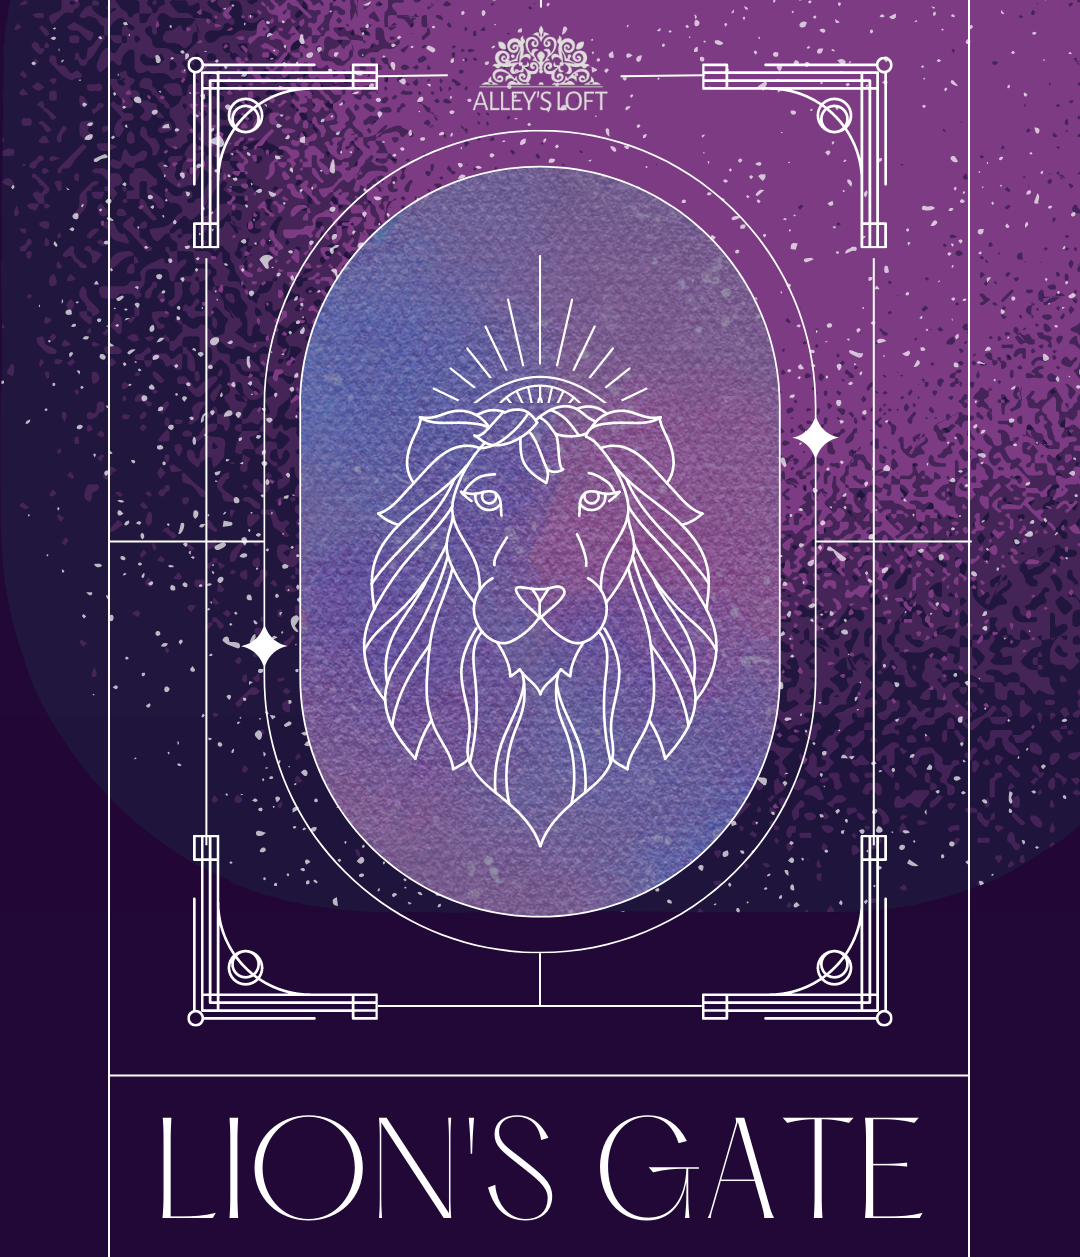 Celestial Lion signifying the astrological event the Lion's Gate Portal which happens every August 8th.